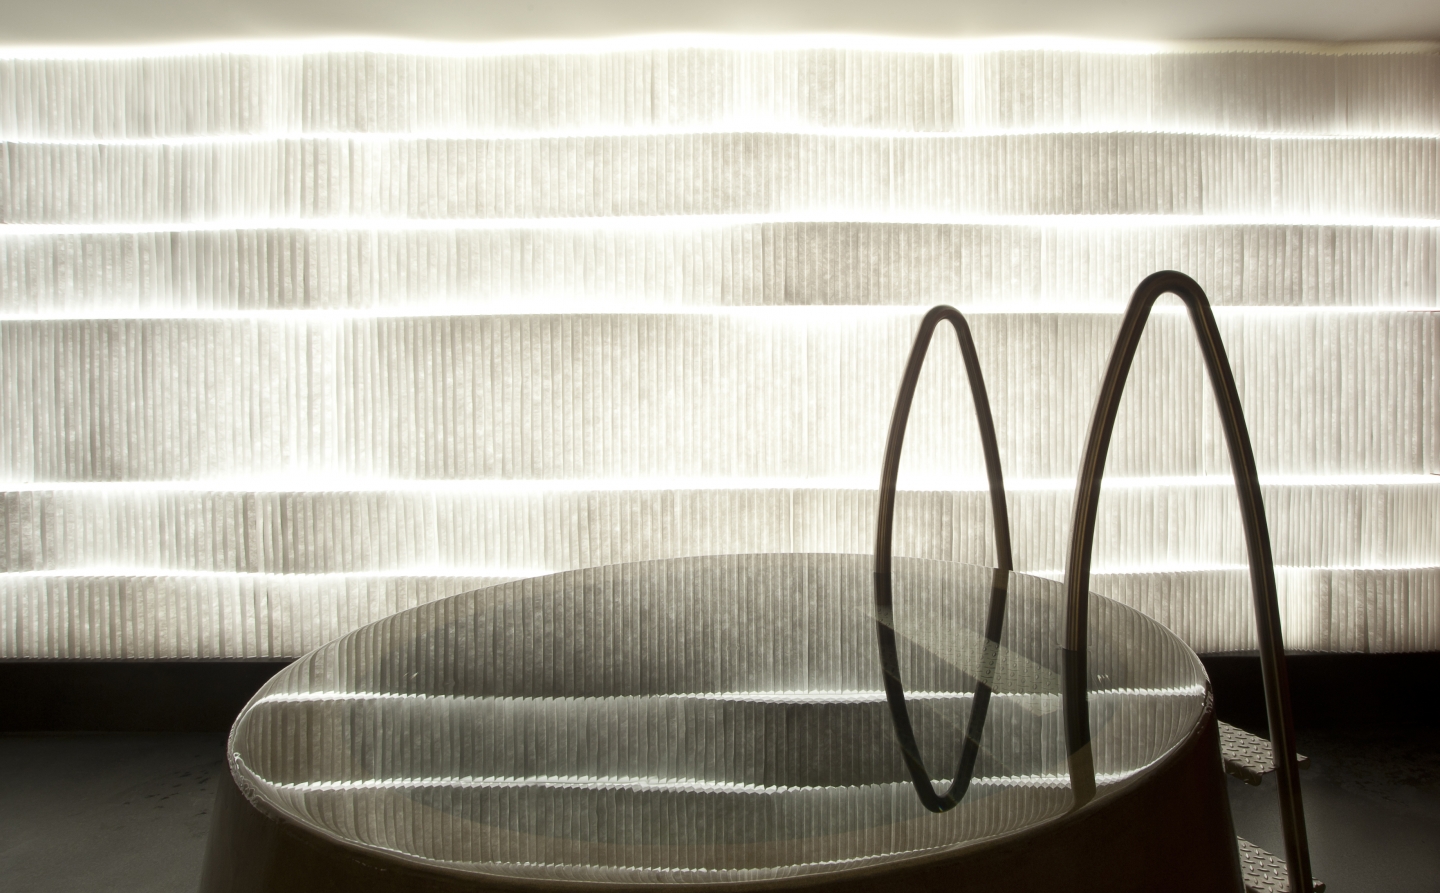 molo white textile softblocks + LED at the Eichstätte Spa in Zug, Switzerland